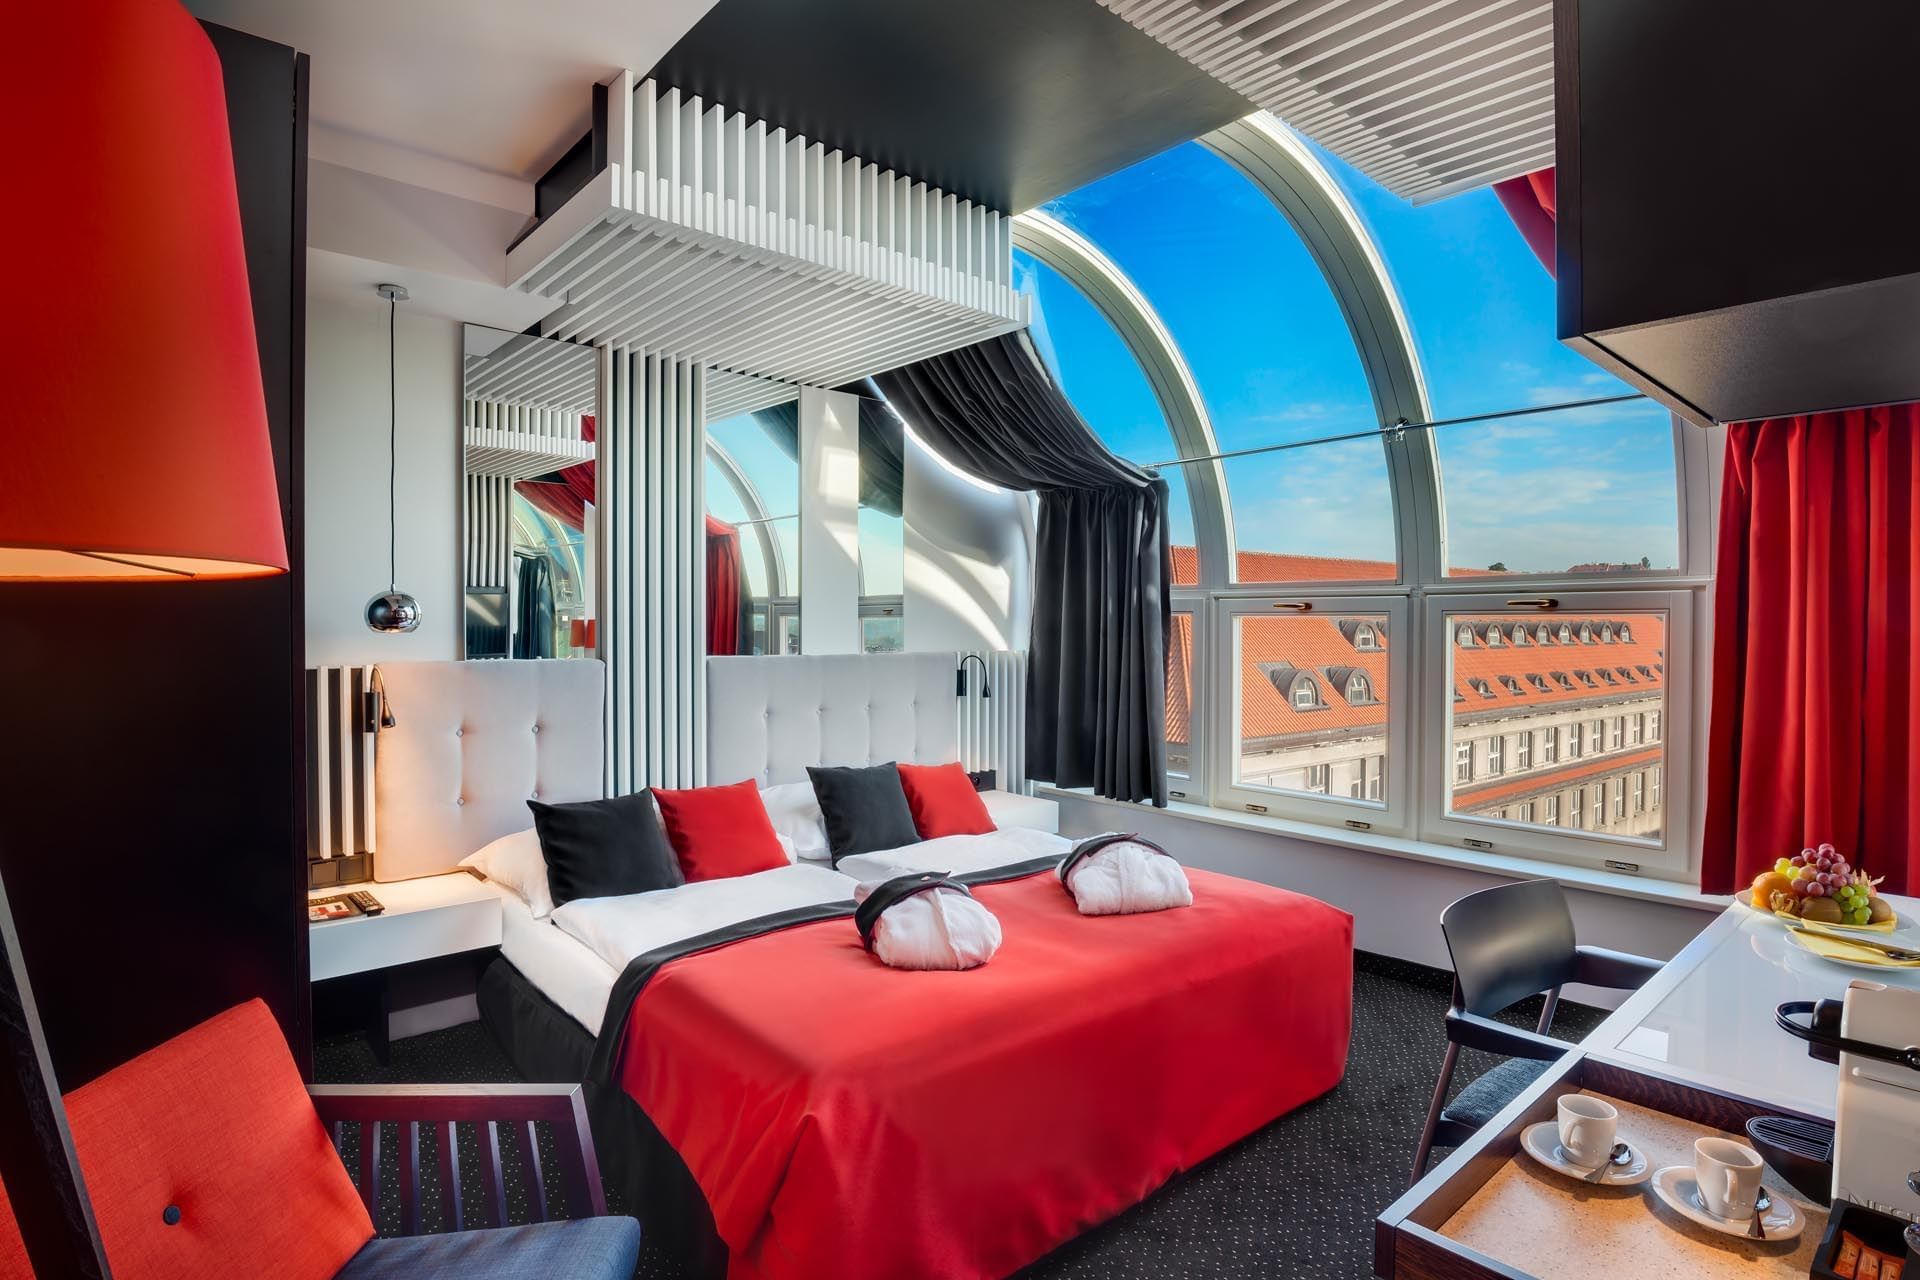 Superior Room with Panoramic Window at Hotel Clement Prague